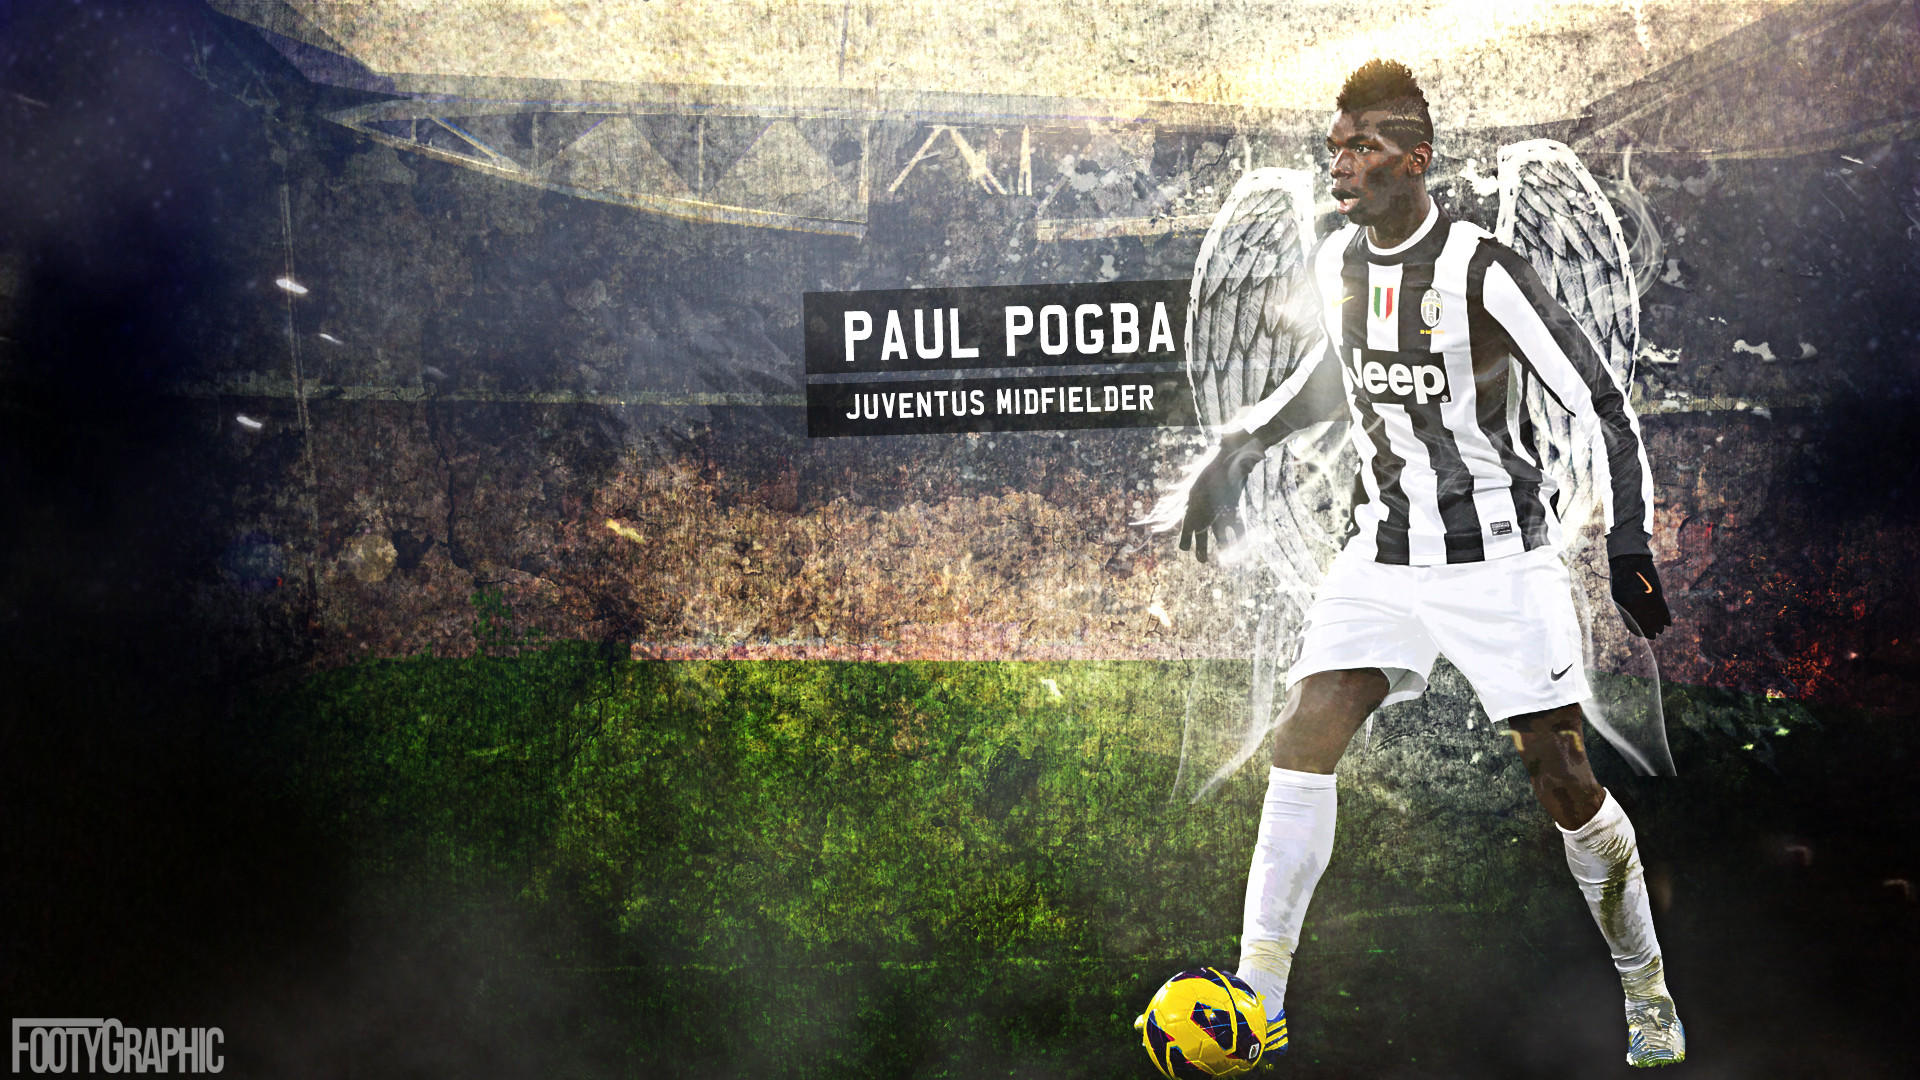 1920x1080 Paul Pogba Wallpapers - HD Wallpapers Backgrounds of Your Choice paulpogba  | Explore paulpogba on DeviantArt ...